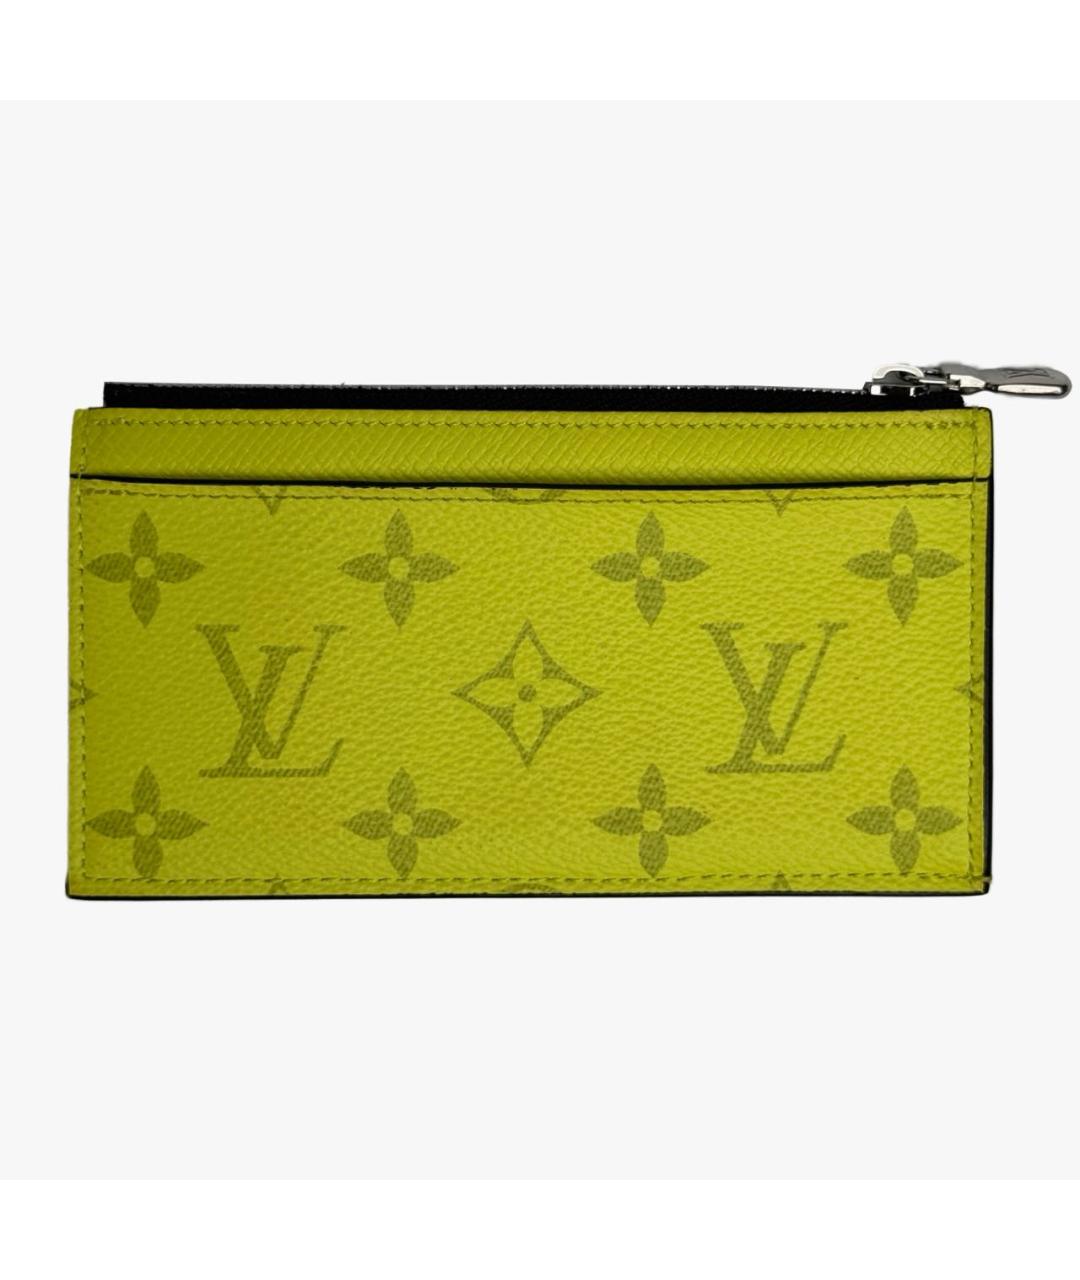 LOUIS VUITTON PRE-OWNED Желтый кардхолдер, фото 2